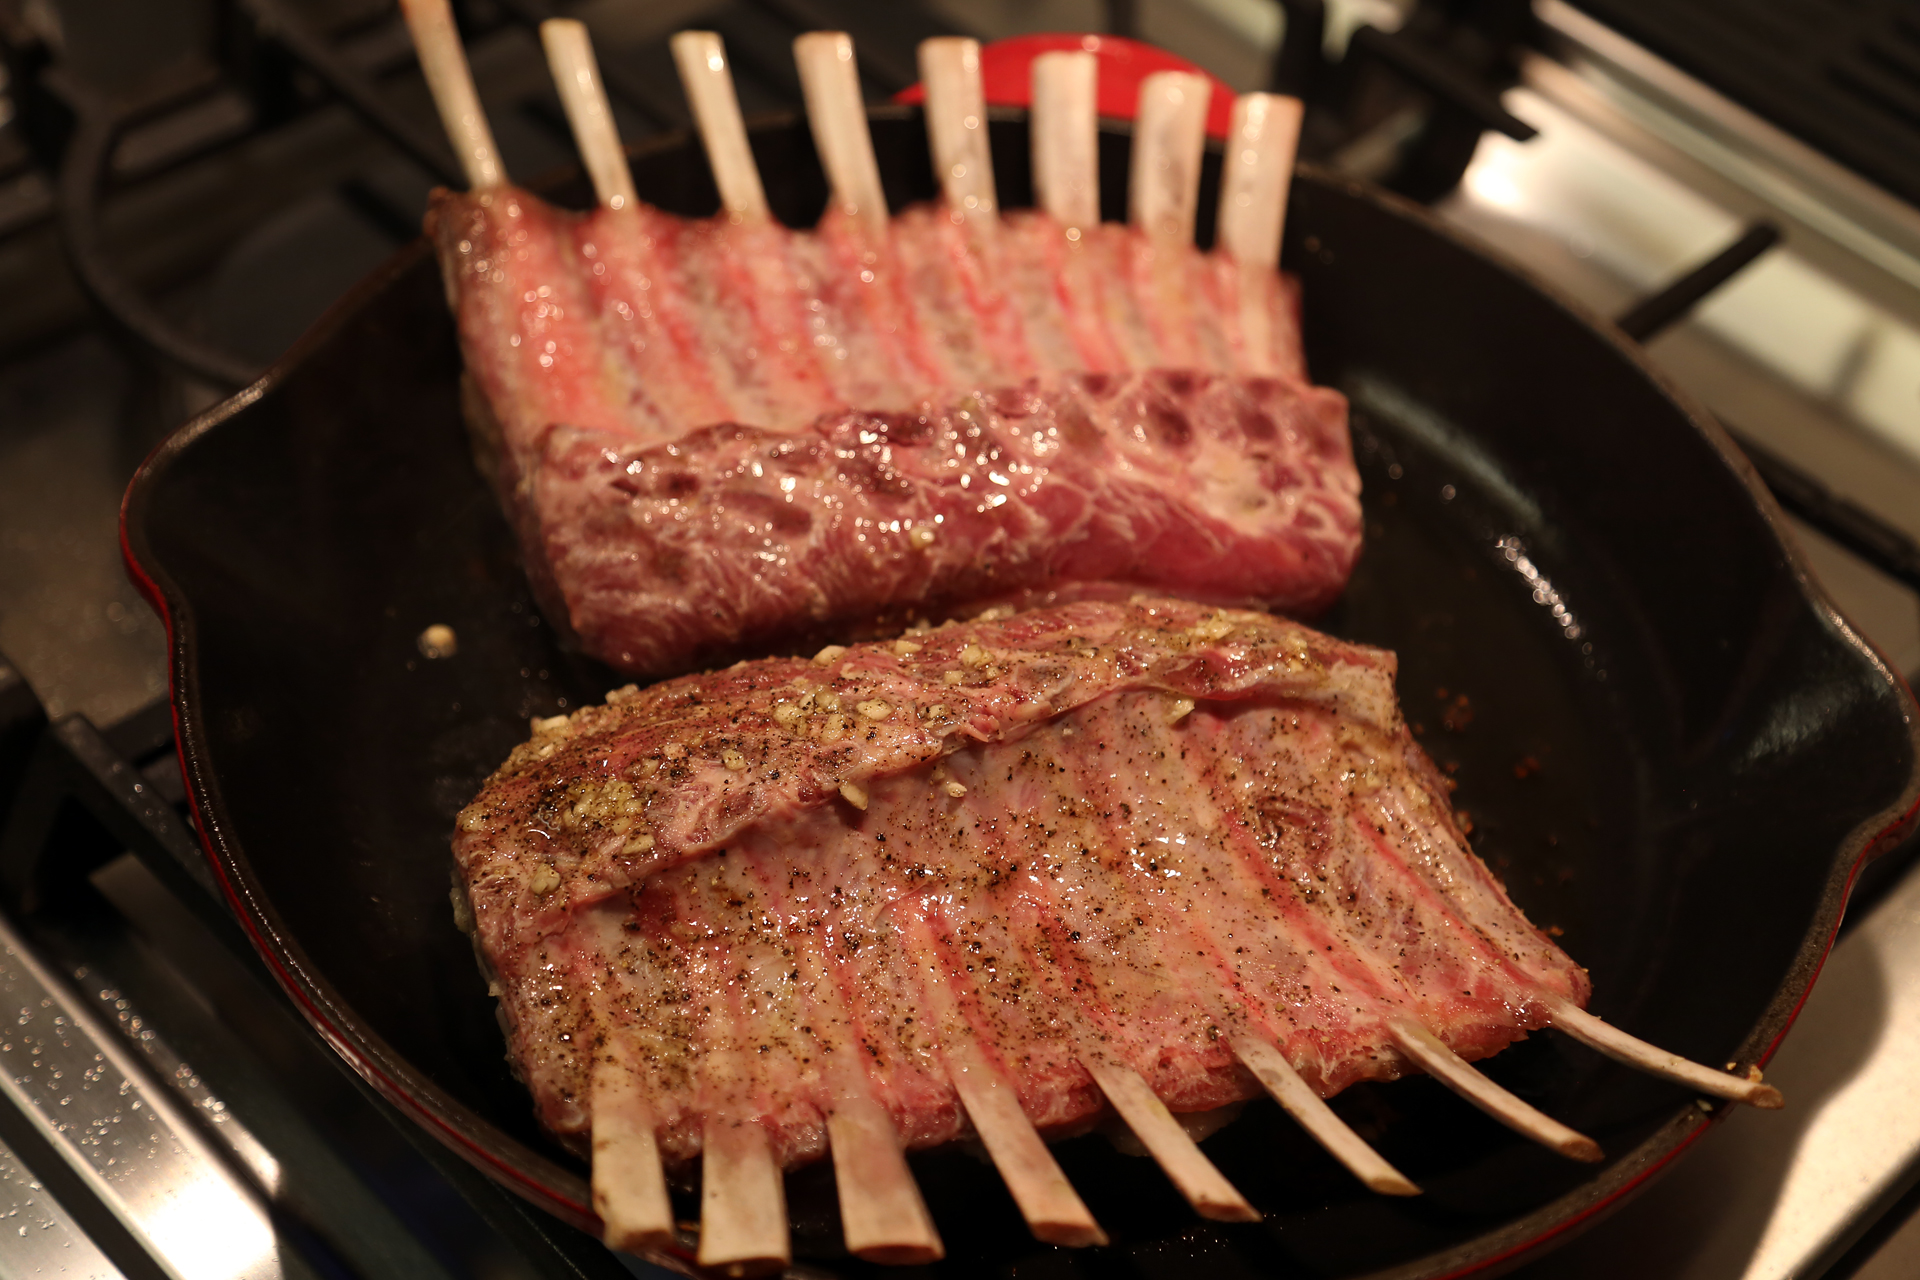 Add the racks, fat side down, and sear until browned, turning once or twice, about 5 minutes.